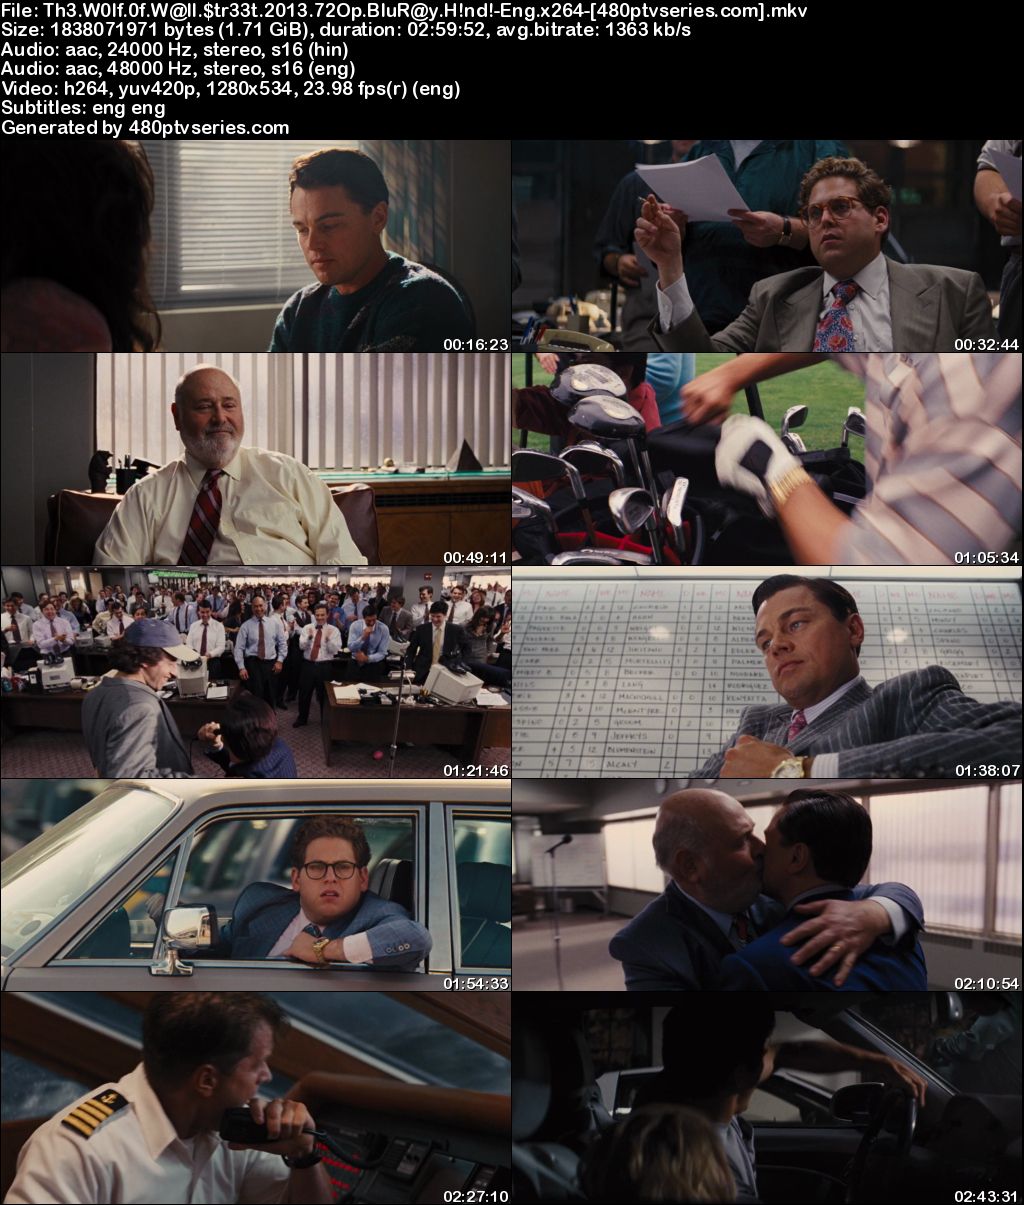 Watch Online Free The Wolf of Wall Street (2013) Full Hindi Dual Audio Movie Download 480p 720p BluRay